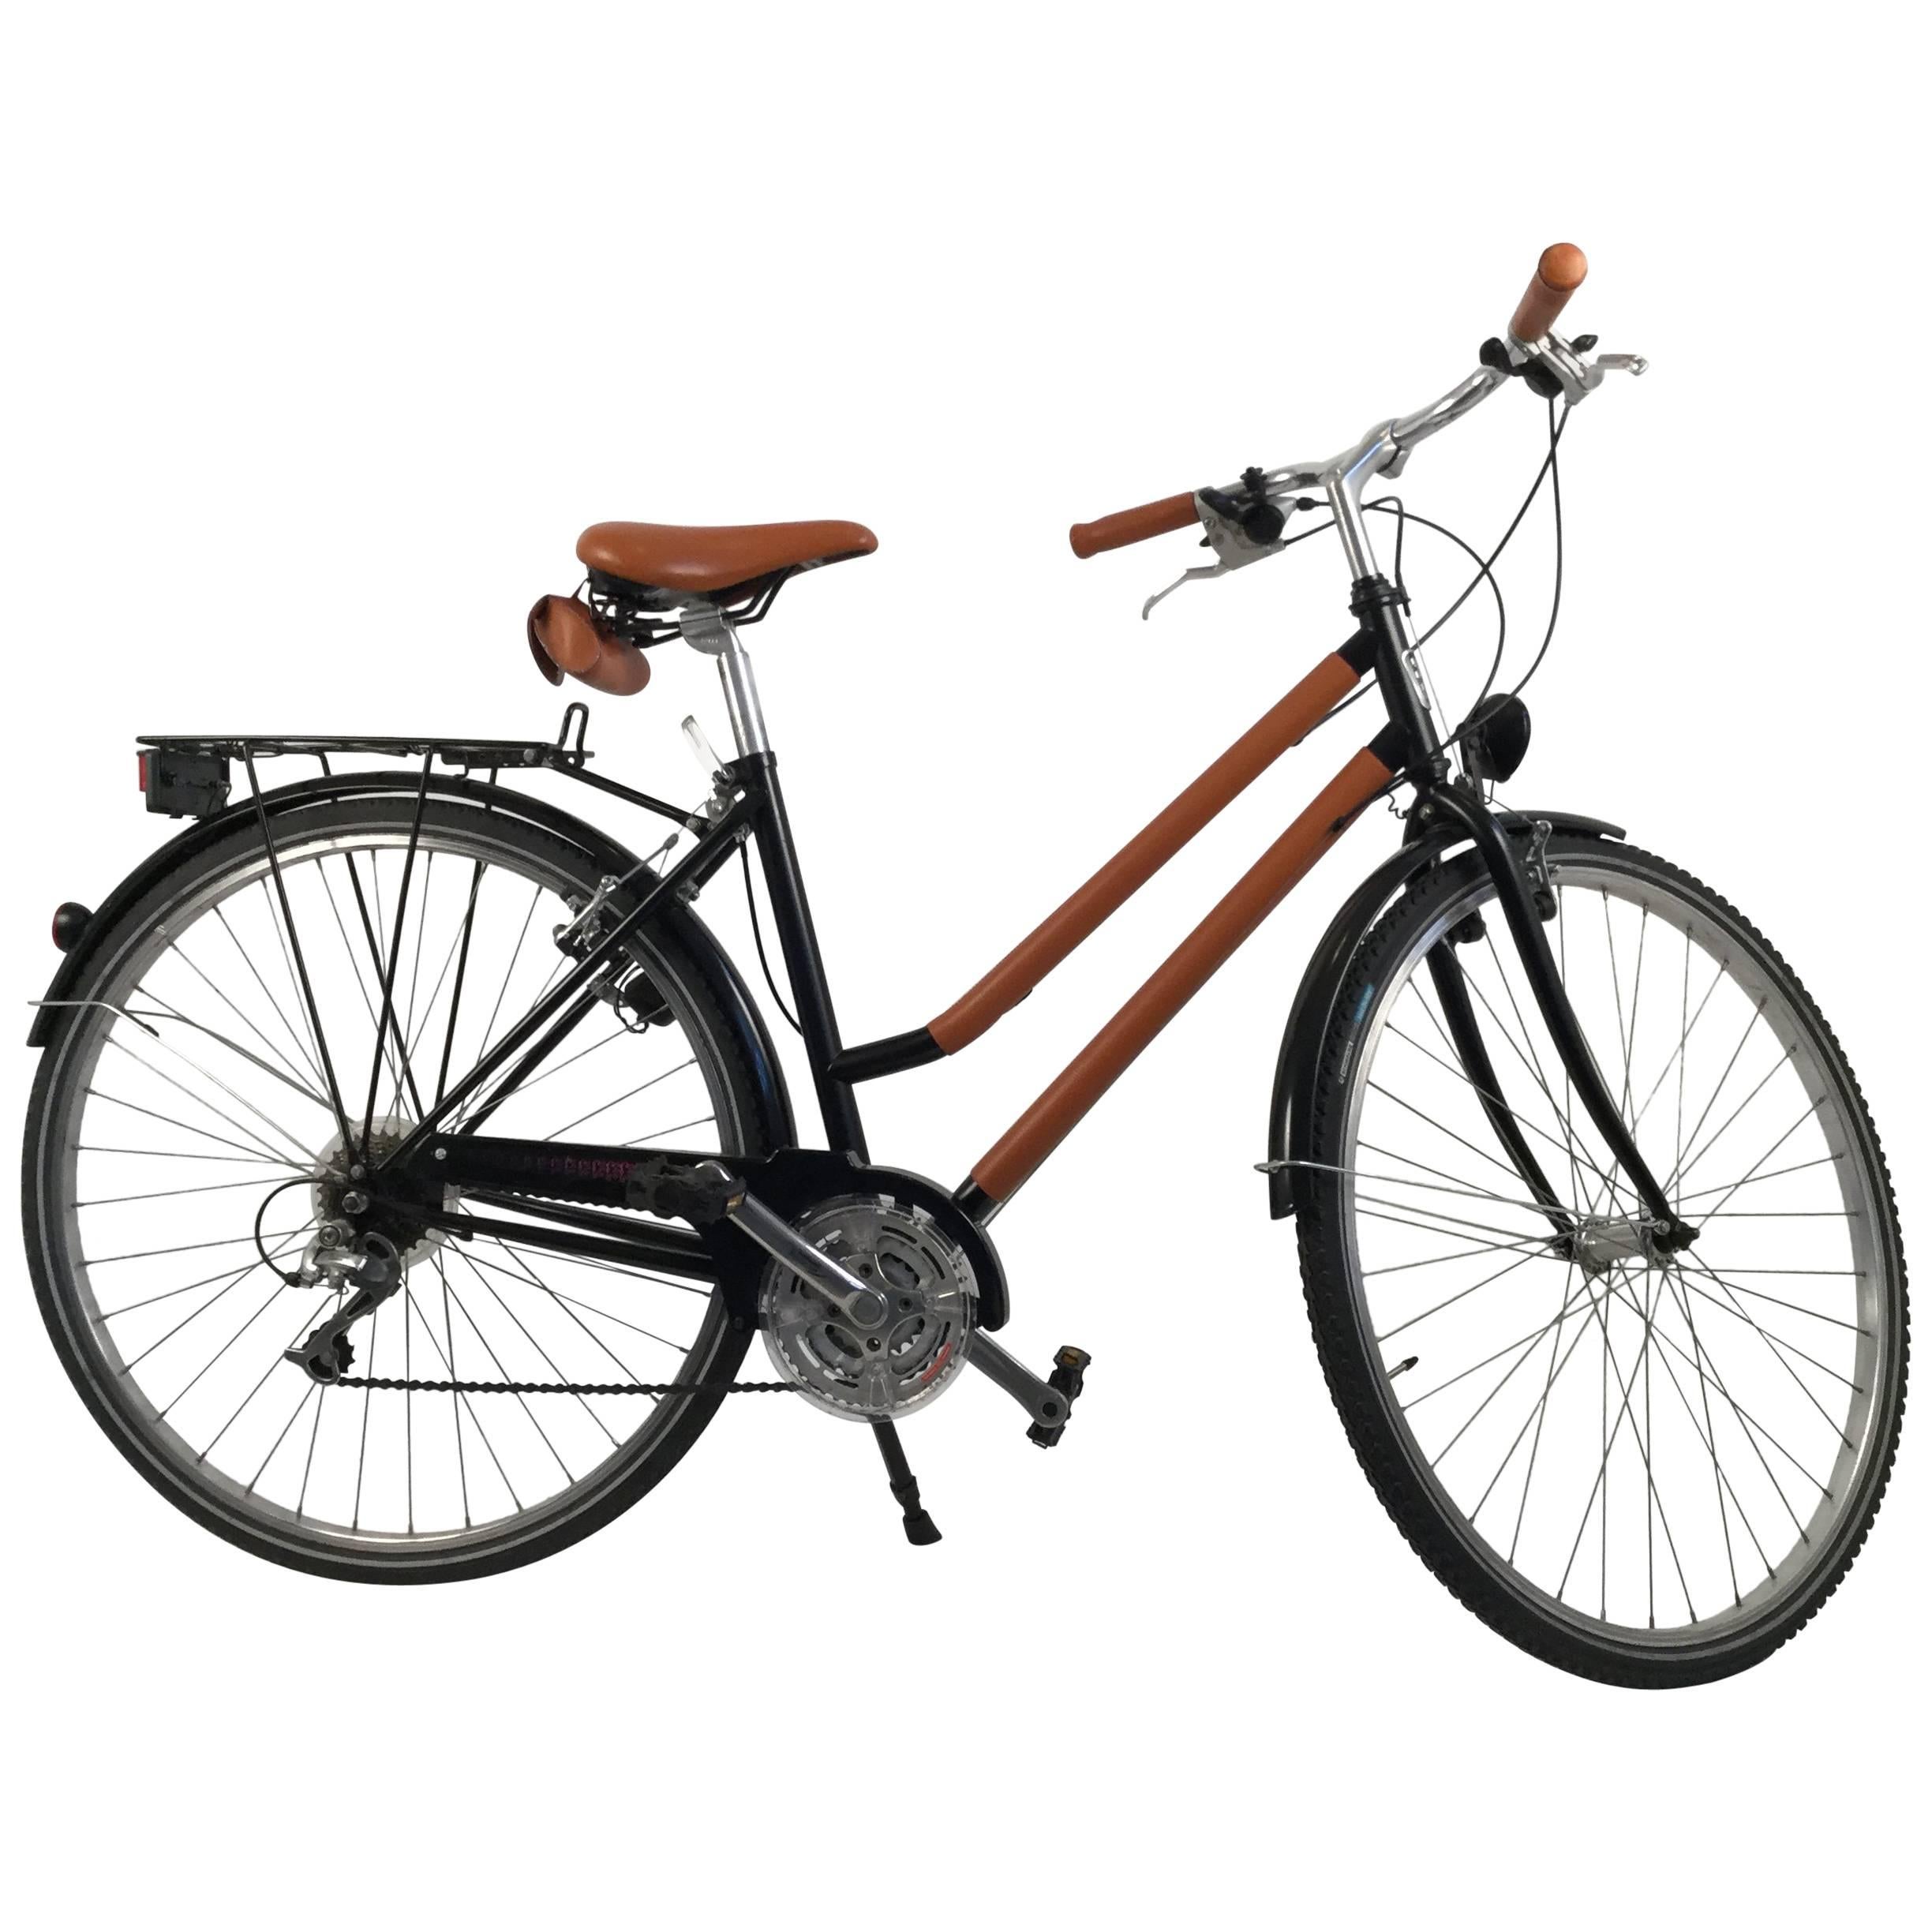 1994 Hermès Bicycle in Cooperation with Peugeot